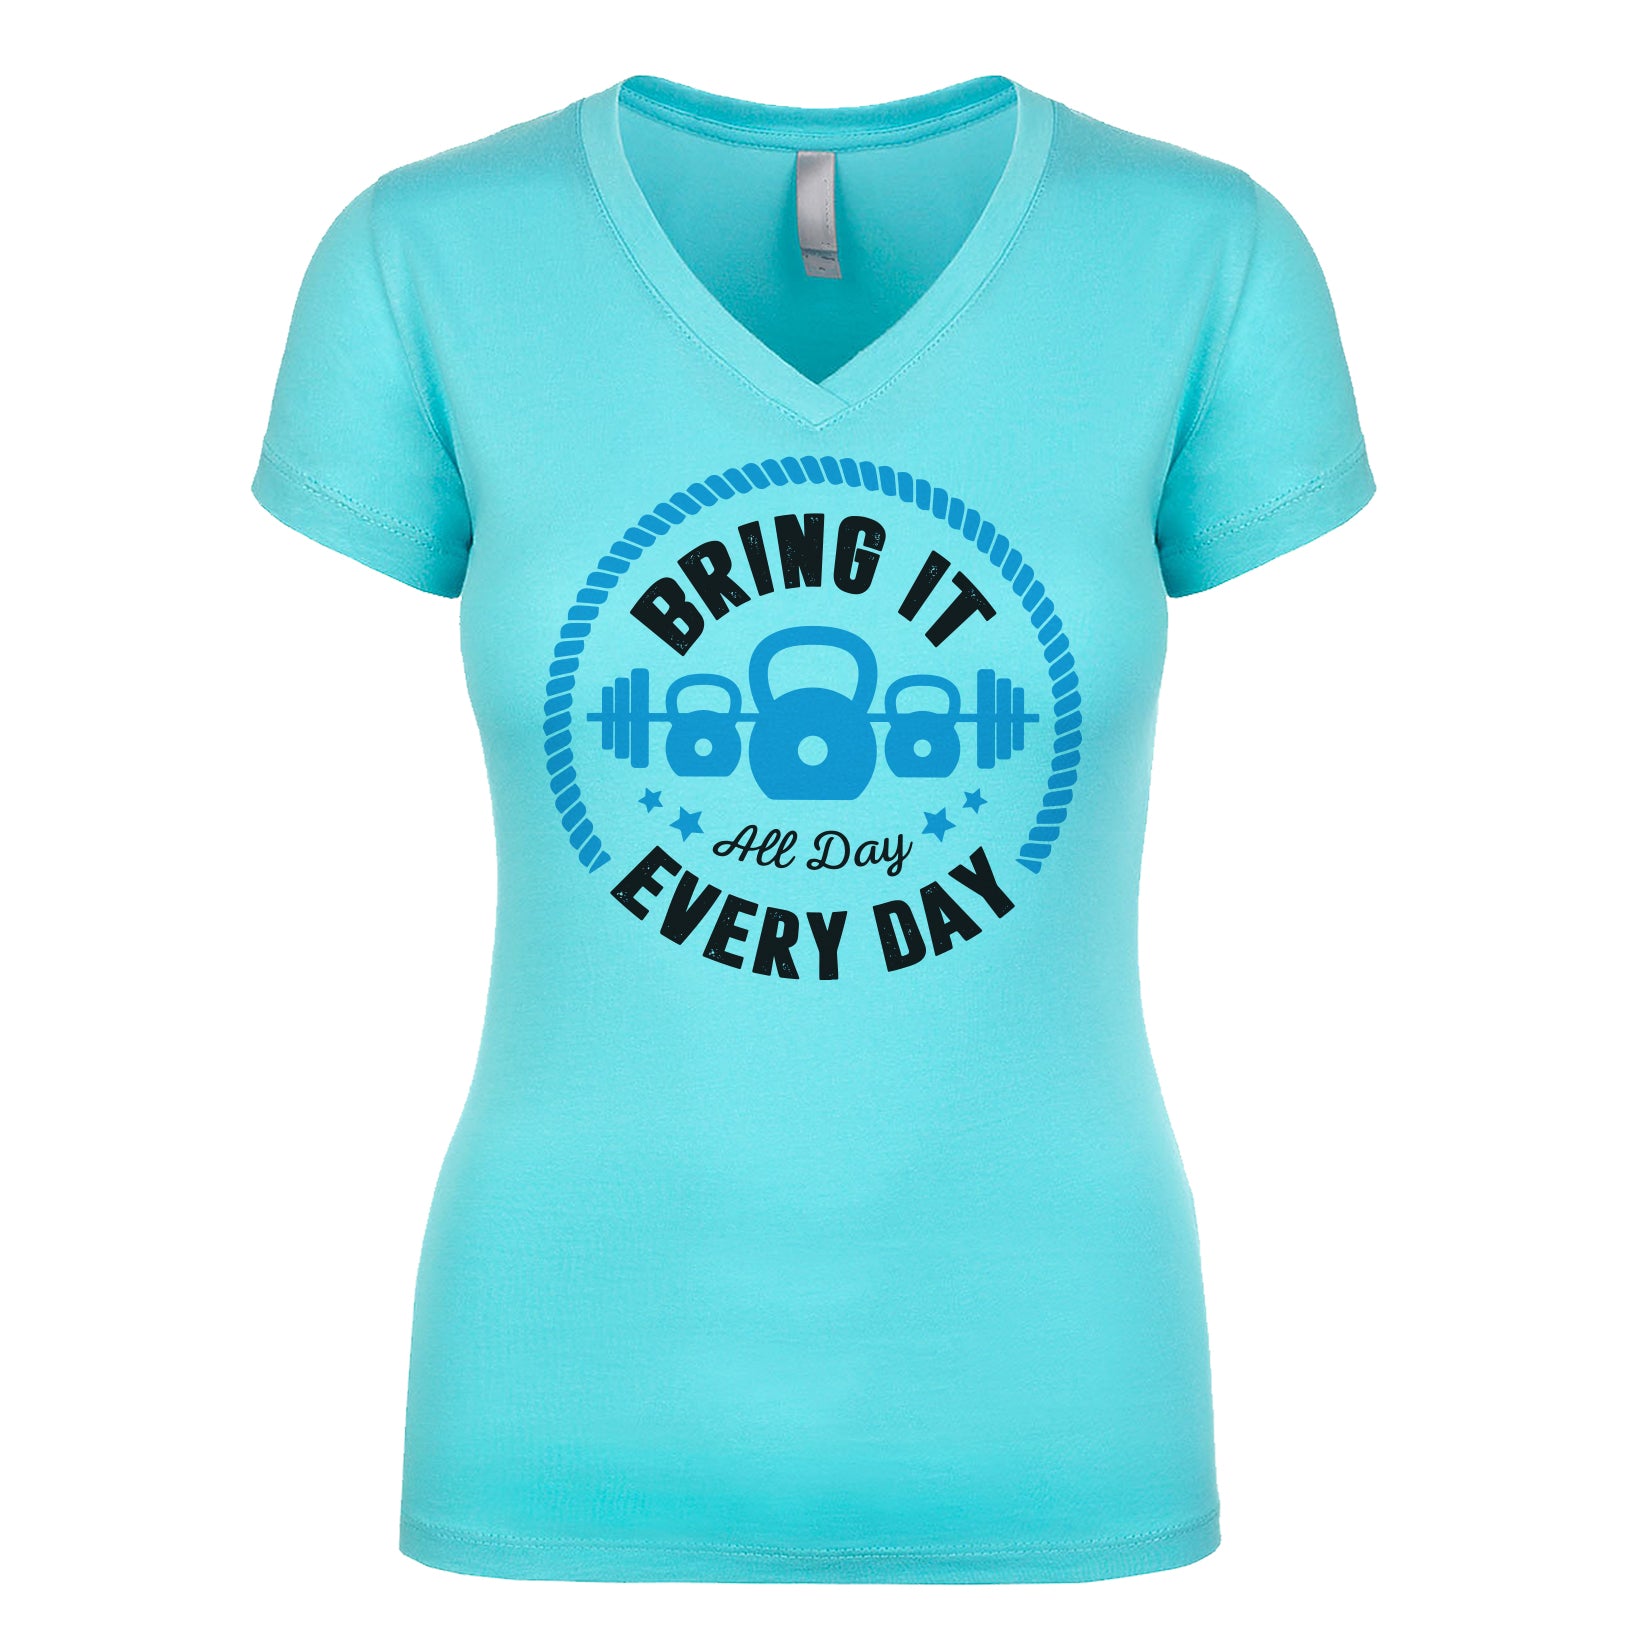 Bring It All Day, Every day Women's V Neck